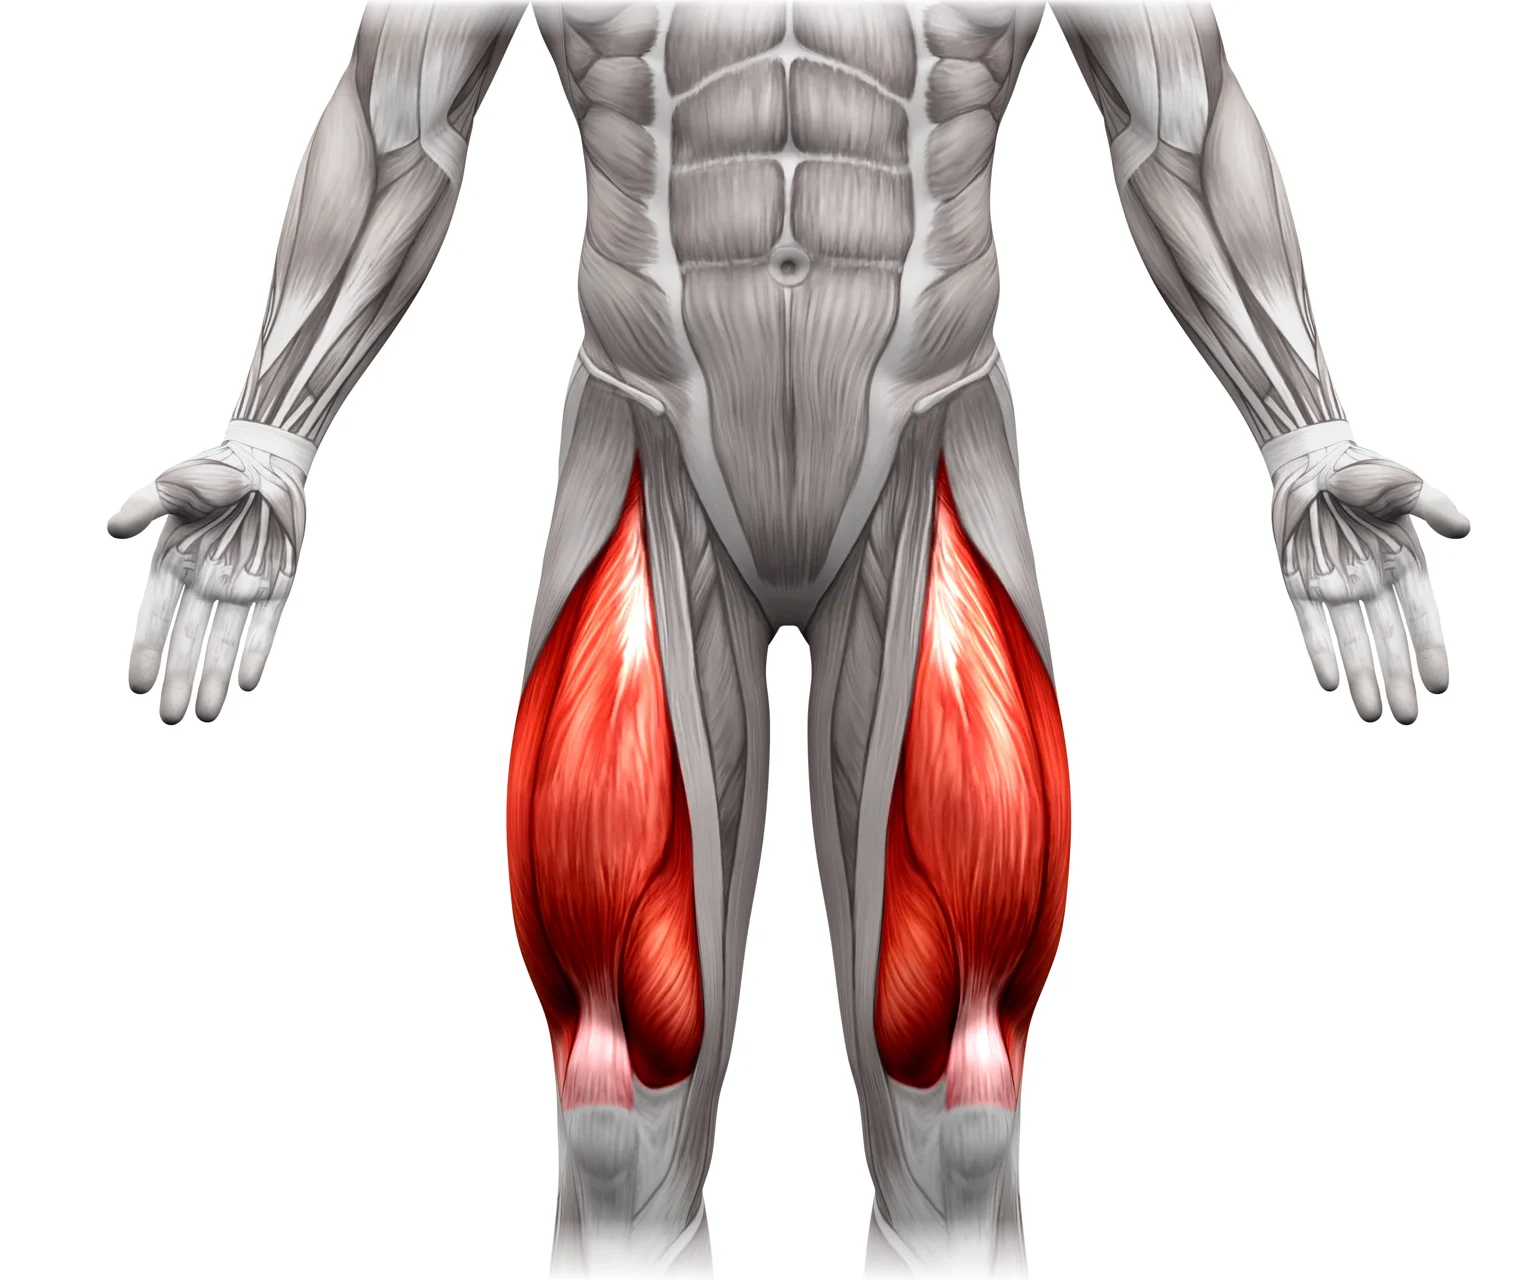 diagram - Anatomy of the front upper leg, showing the position of the quadriceps muscles.